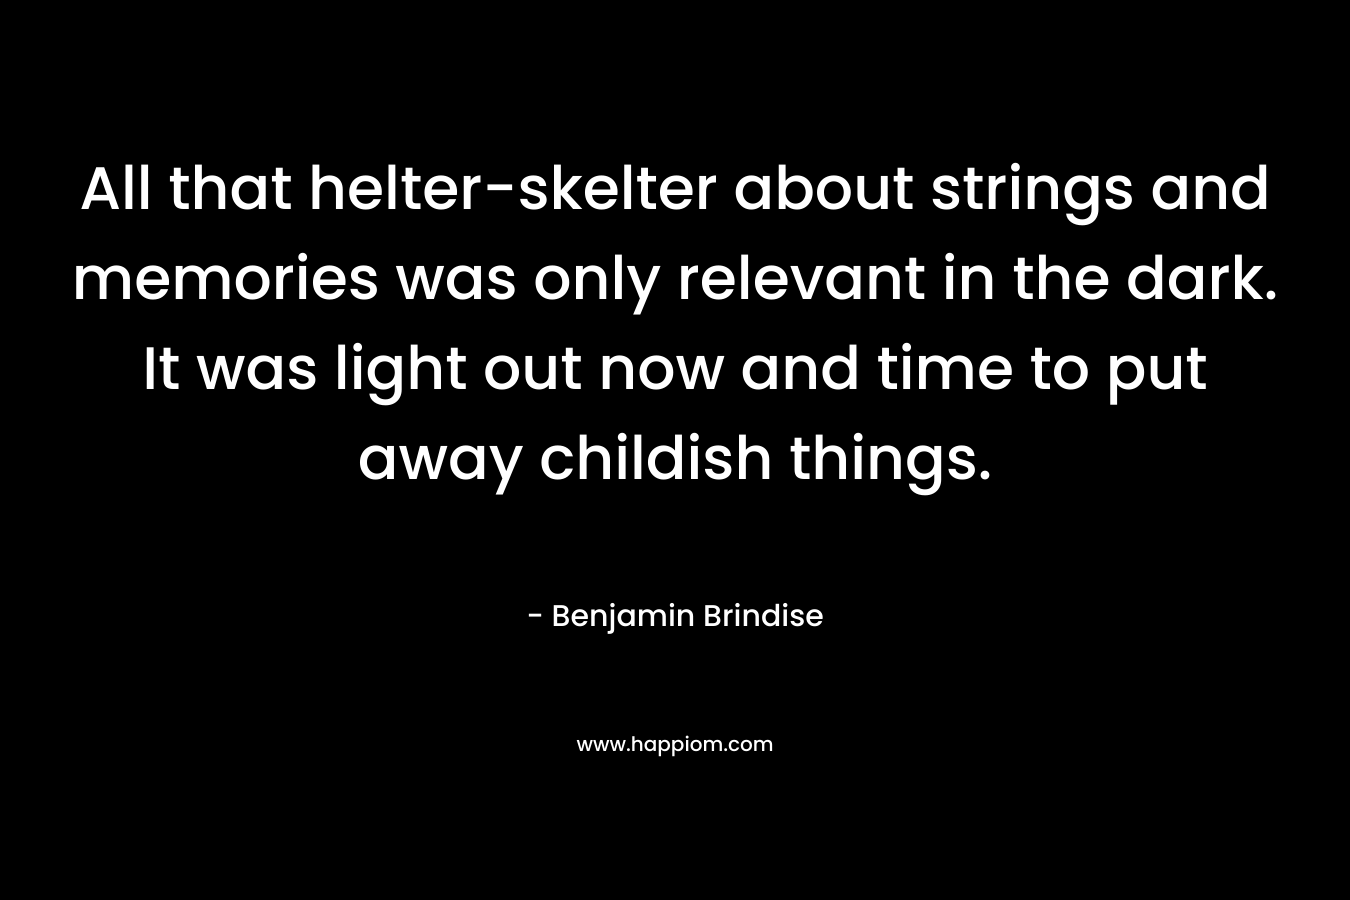 All that helter-skelter about strings and memories was only relevant in the dark. It was light out now and time to put away childish things.